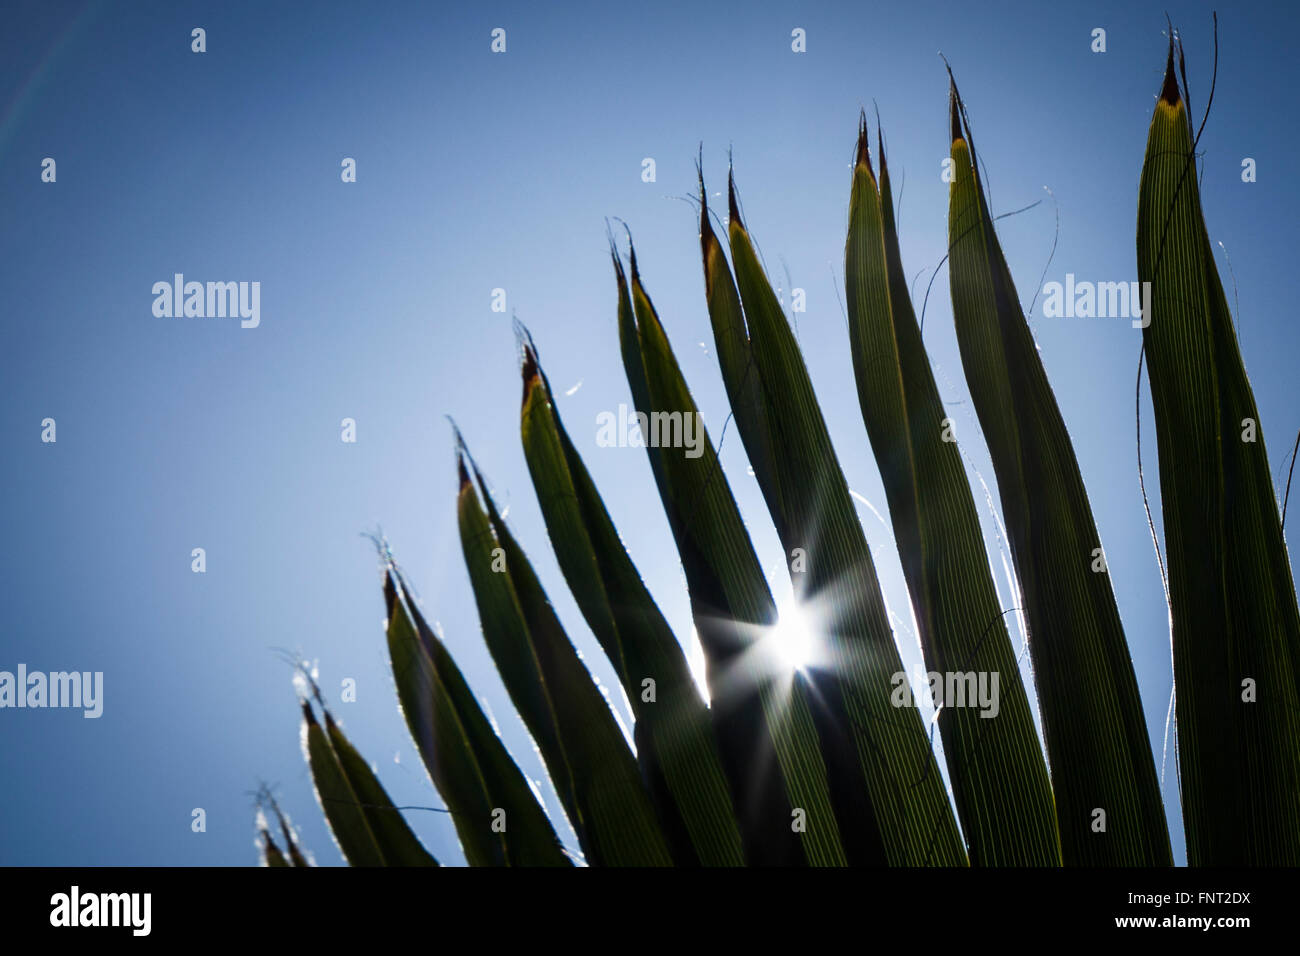 The sun bursts through the pointed fingers of palm fronds against a blue sky. Stock Photo